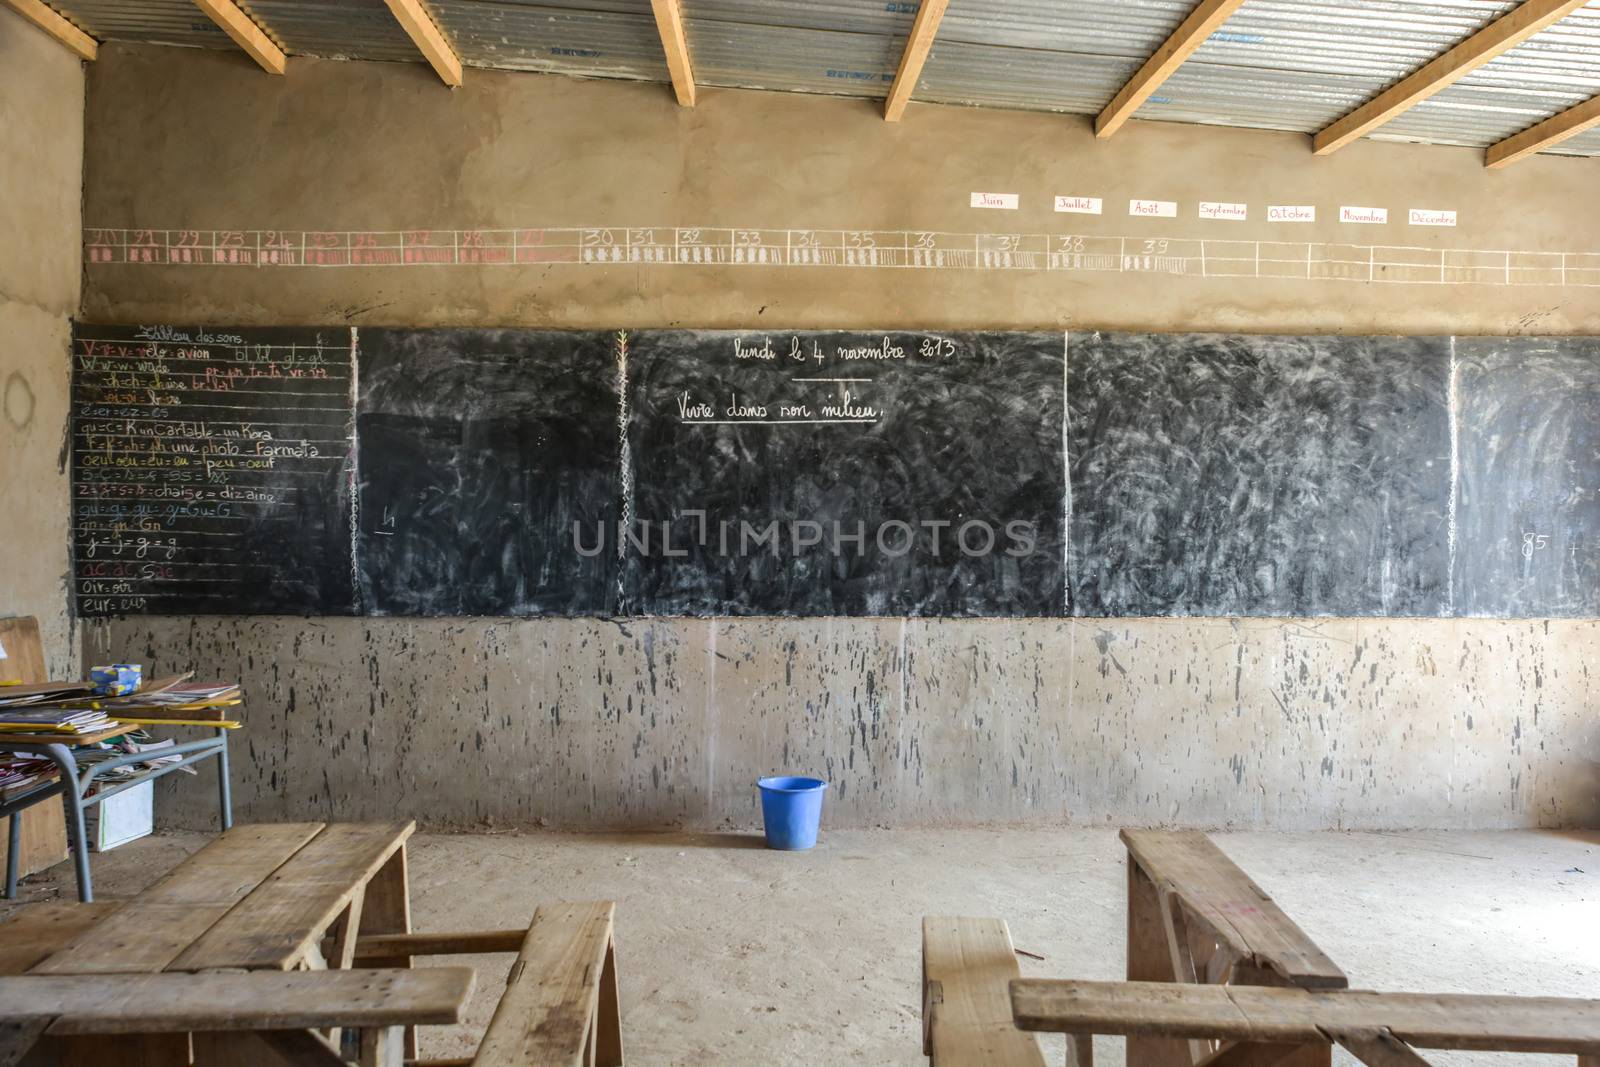 classroom of a primary school in Africa